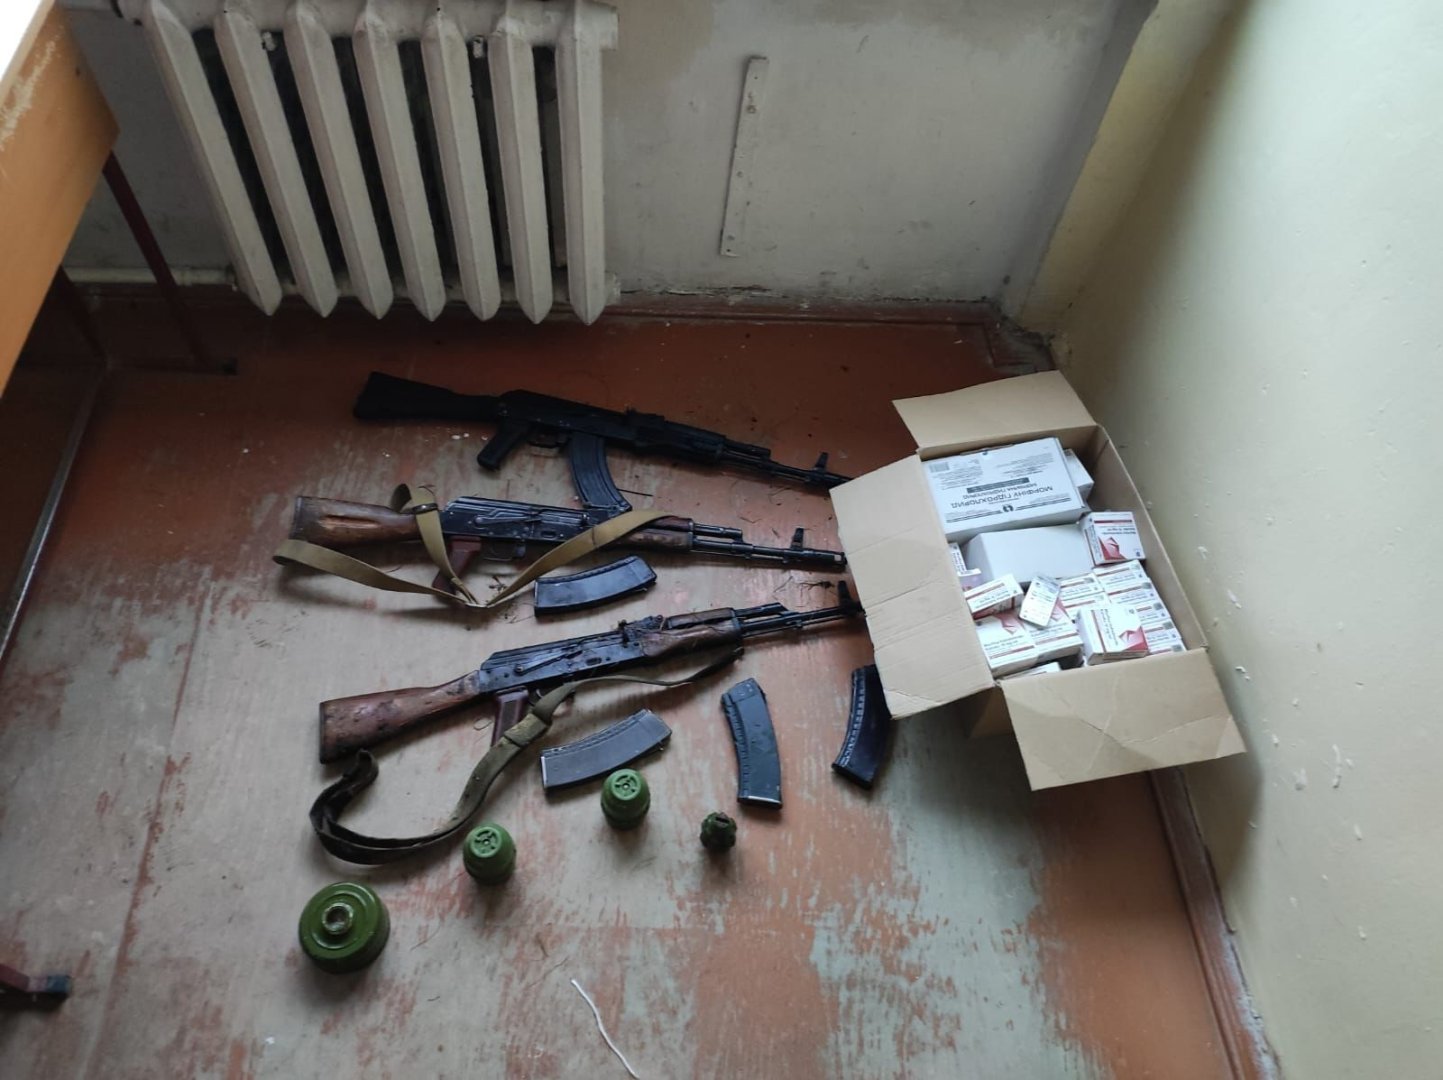 Weapons and ammunition uncovered in Azerbaijan's Khankendi city